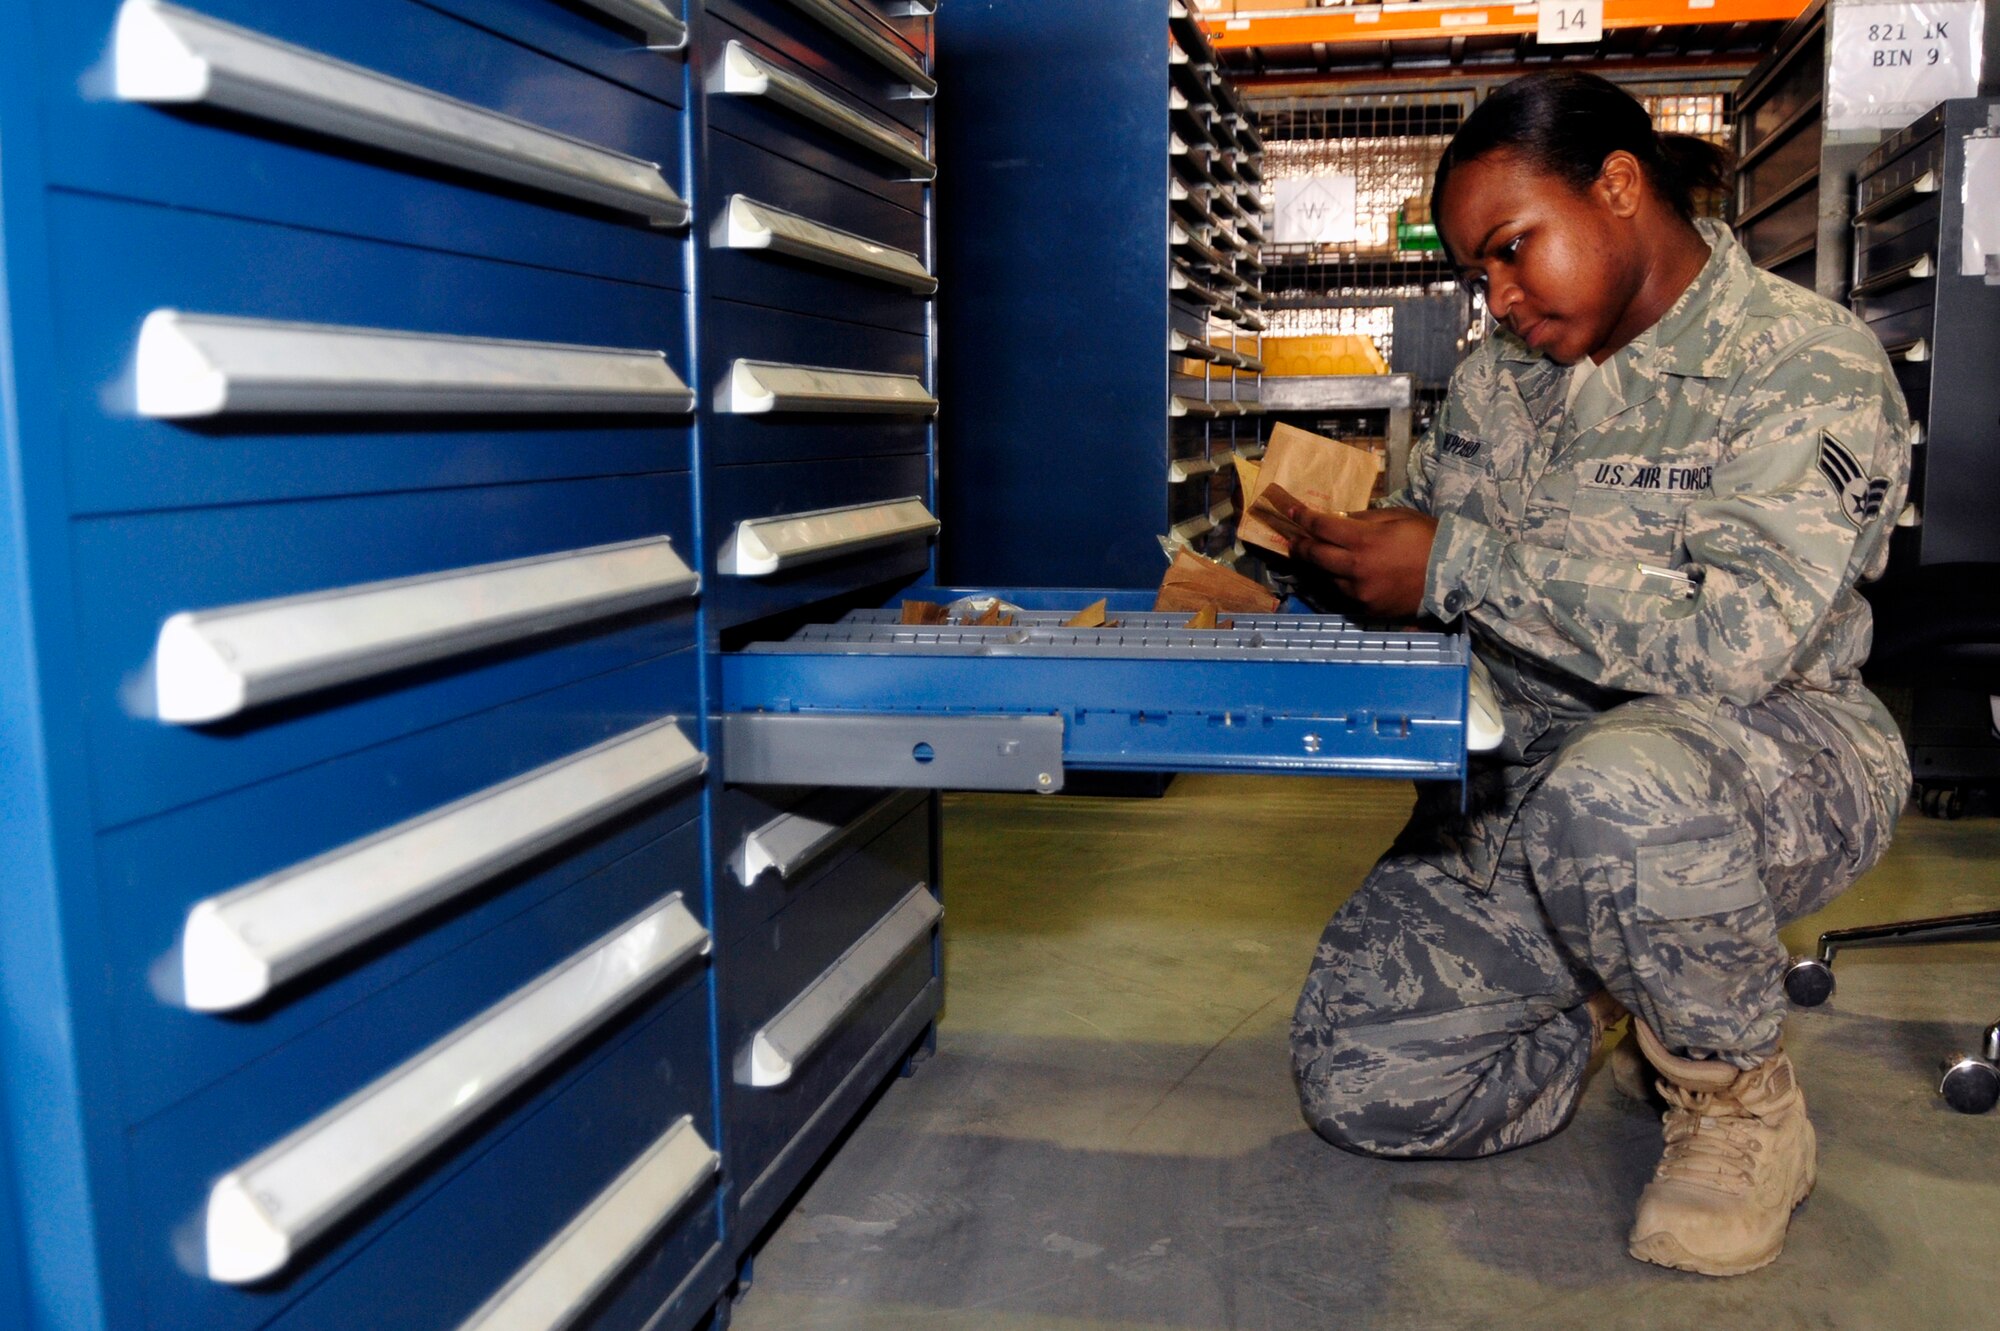 SOUTHWEST ASIA -Senior Airman Athena Sheppard, 380th Expeditionary Logistics Readiness Squadron, checks expiration dates of items in supply Sept. 4, 2009. Airman Sheppard is deployed from Kadena Air Base, Japan, and grew up in Macon, Ga. (U.S. Air Force photo/Tech. Sgt. Charles Larkin Sr)